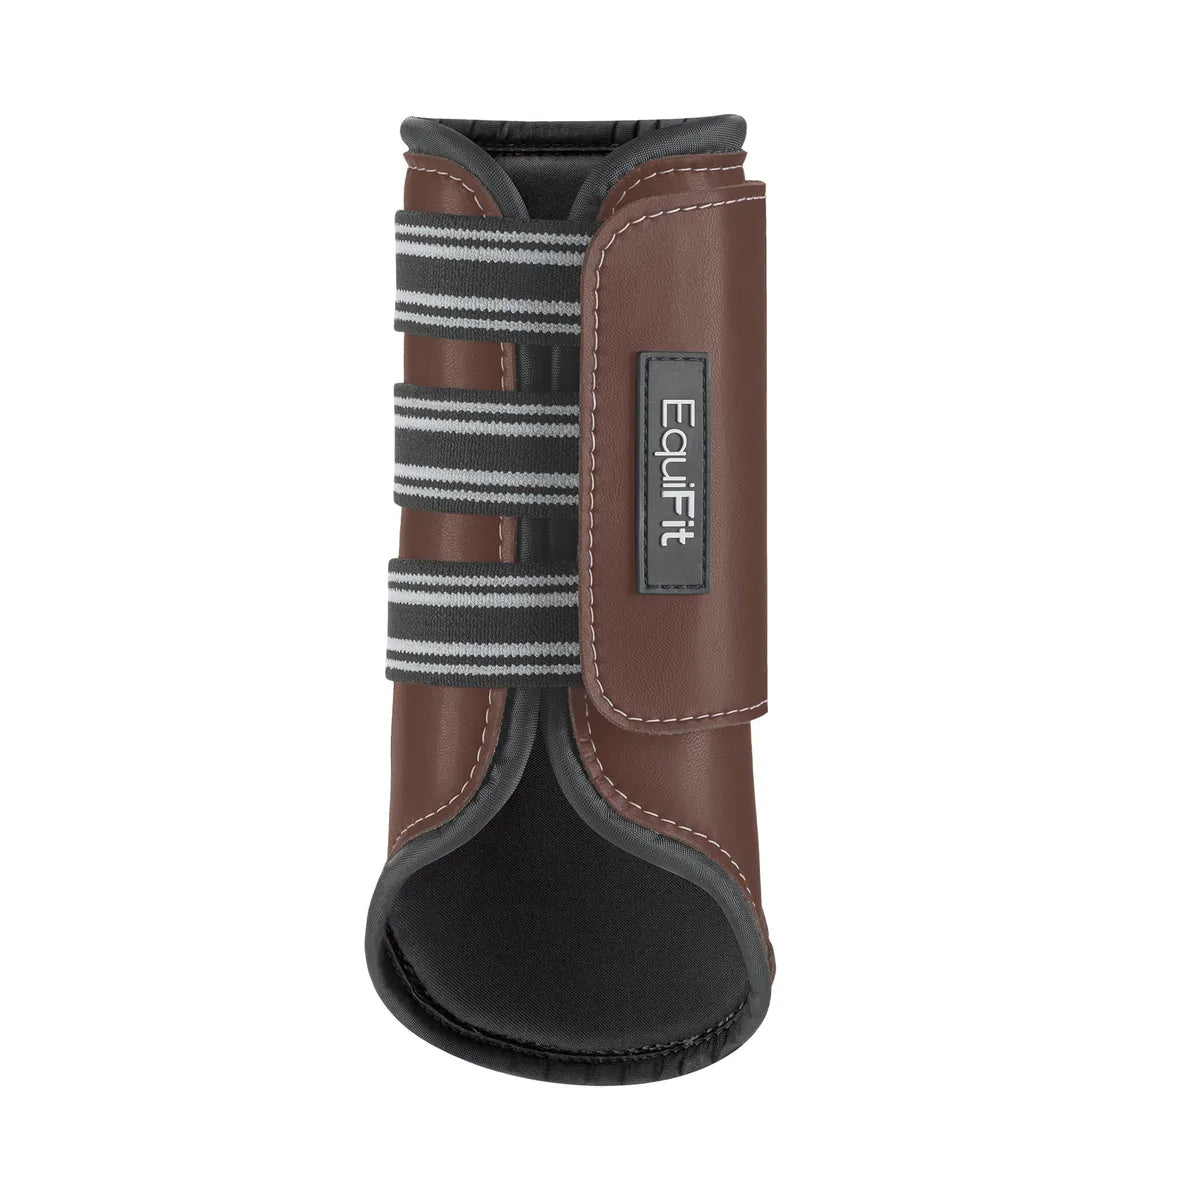 EquiFit MultiTeq Front Boot